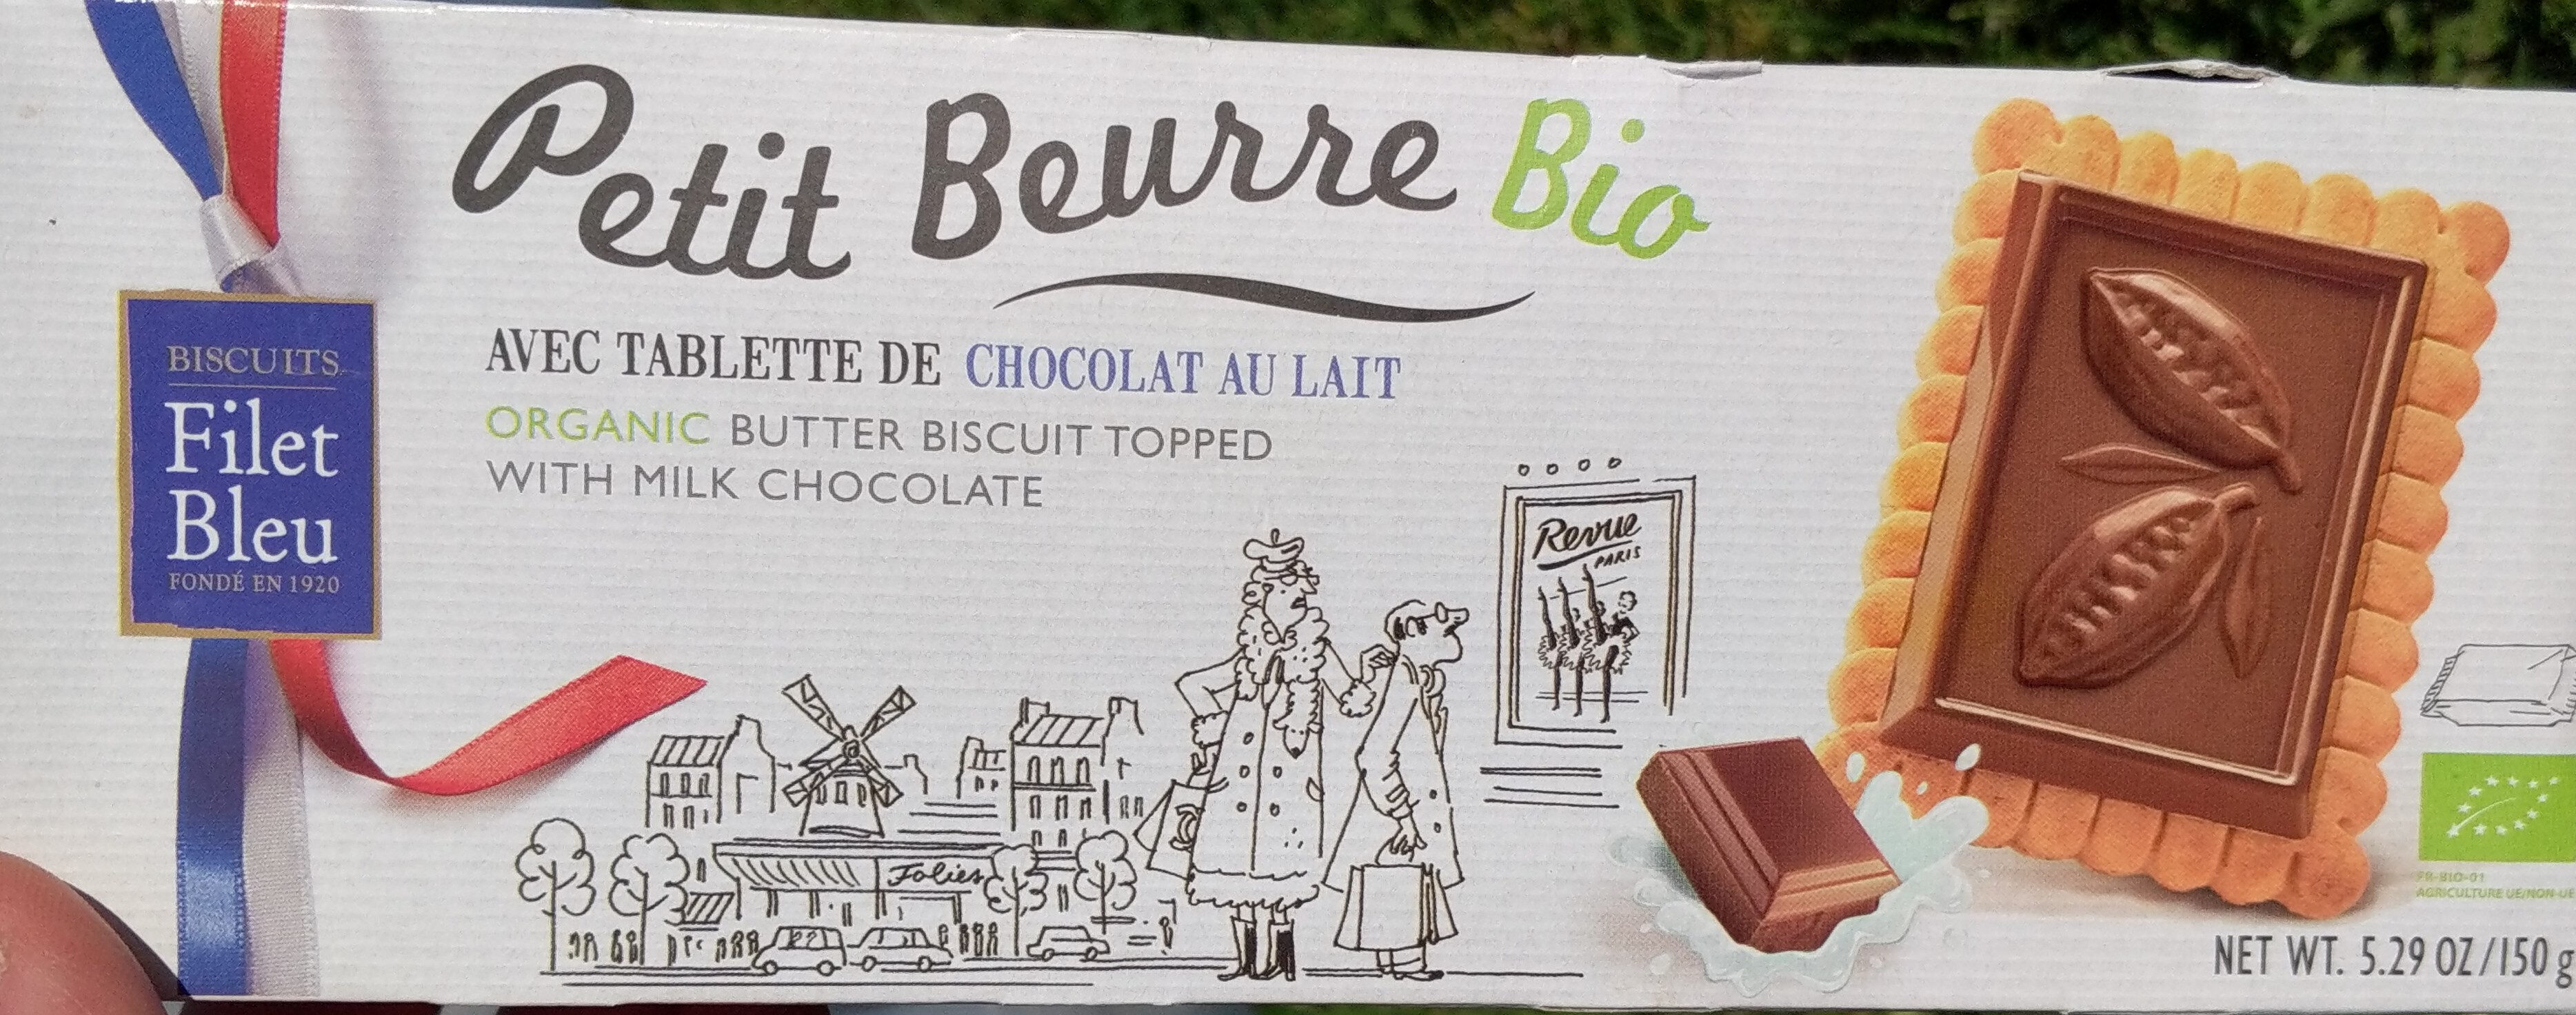 Filet Bleu - Organic Petit Beurre Biscuits with Milk Chocolate, 150g (5.3oz) Box - Product - fr